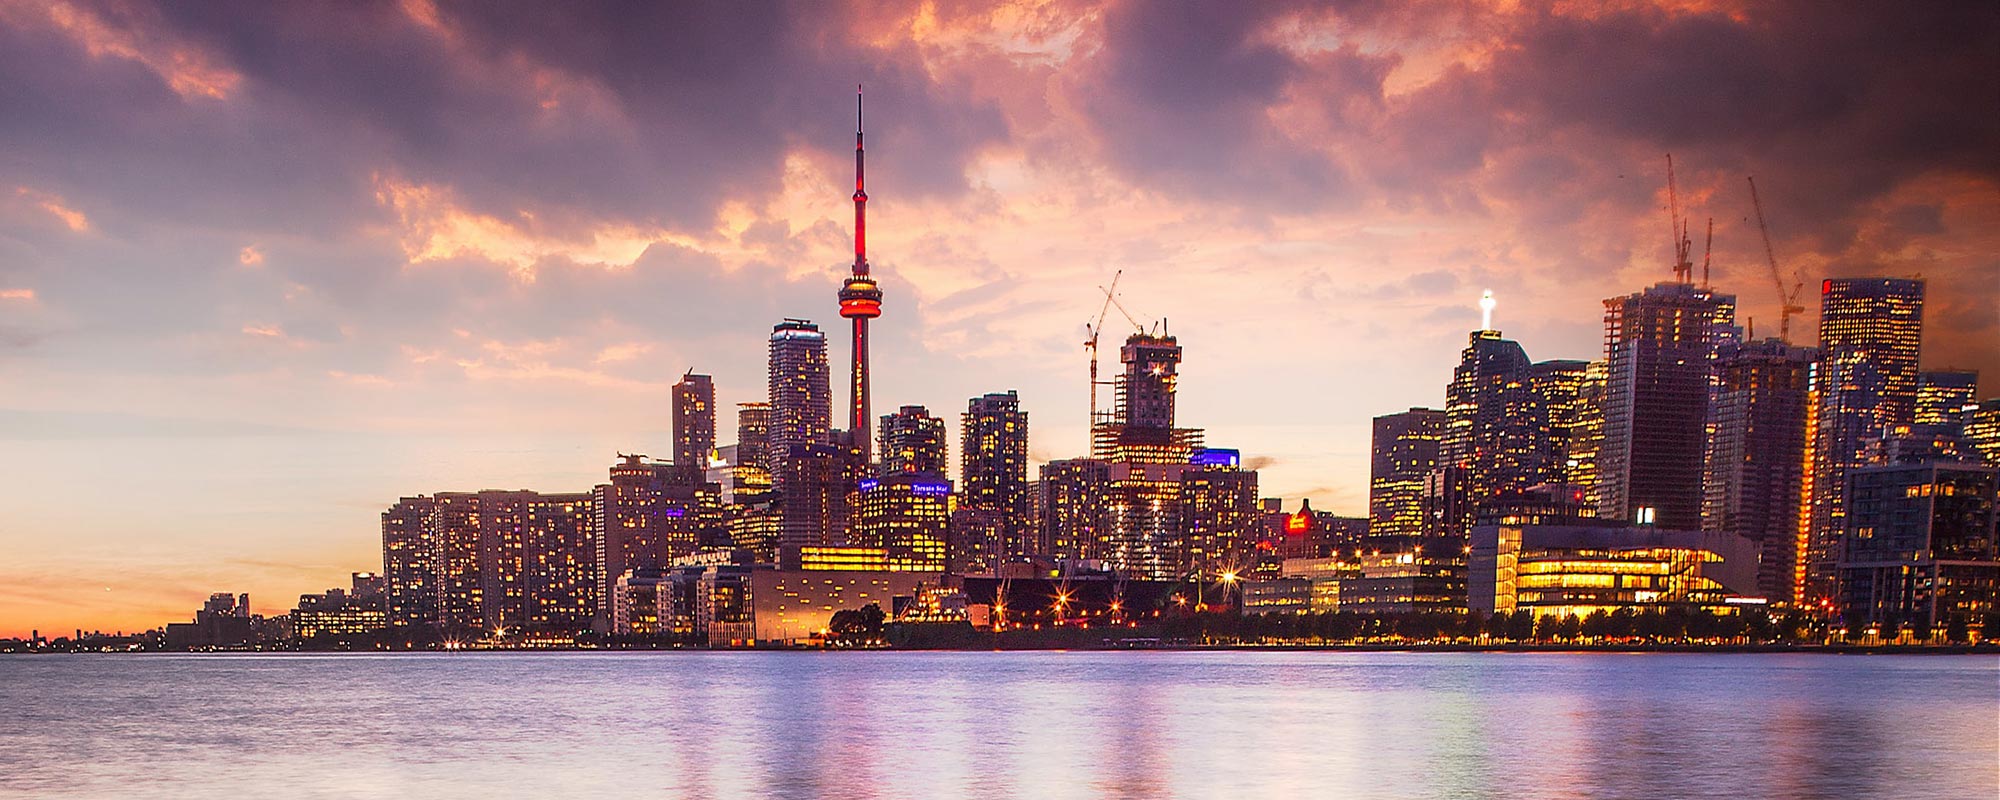 Auditor General To Toronto’s Smart Cities: Not So Fast